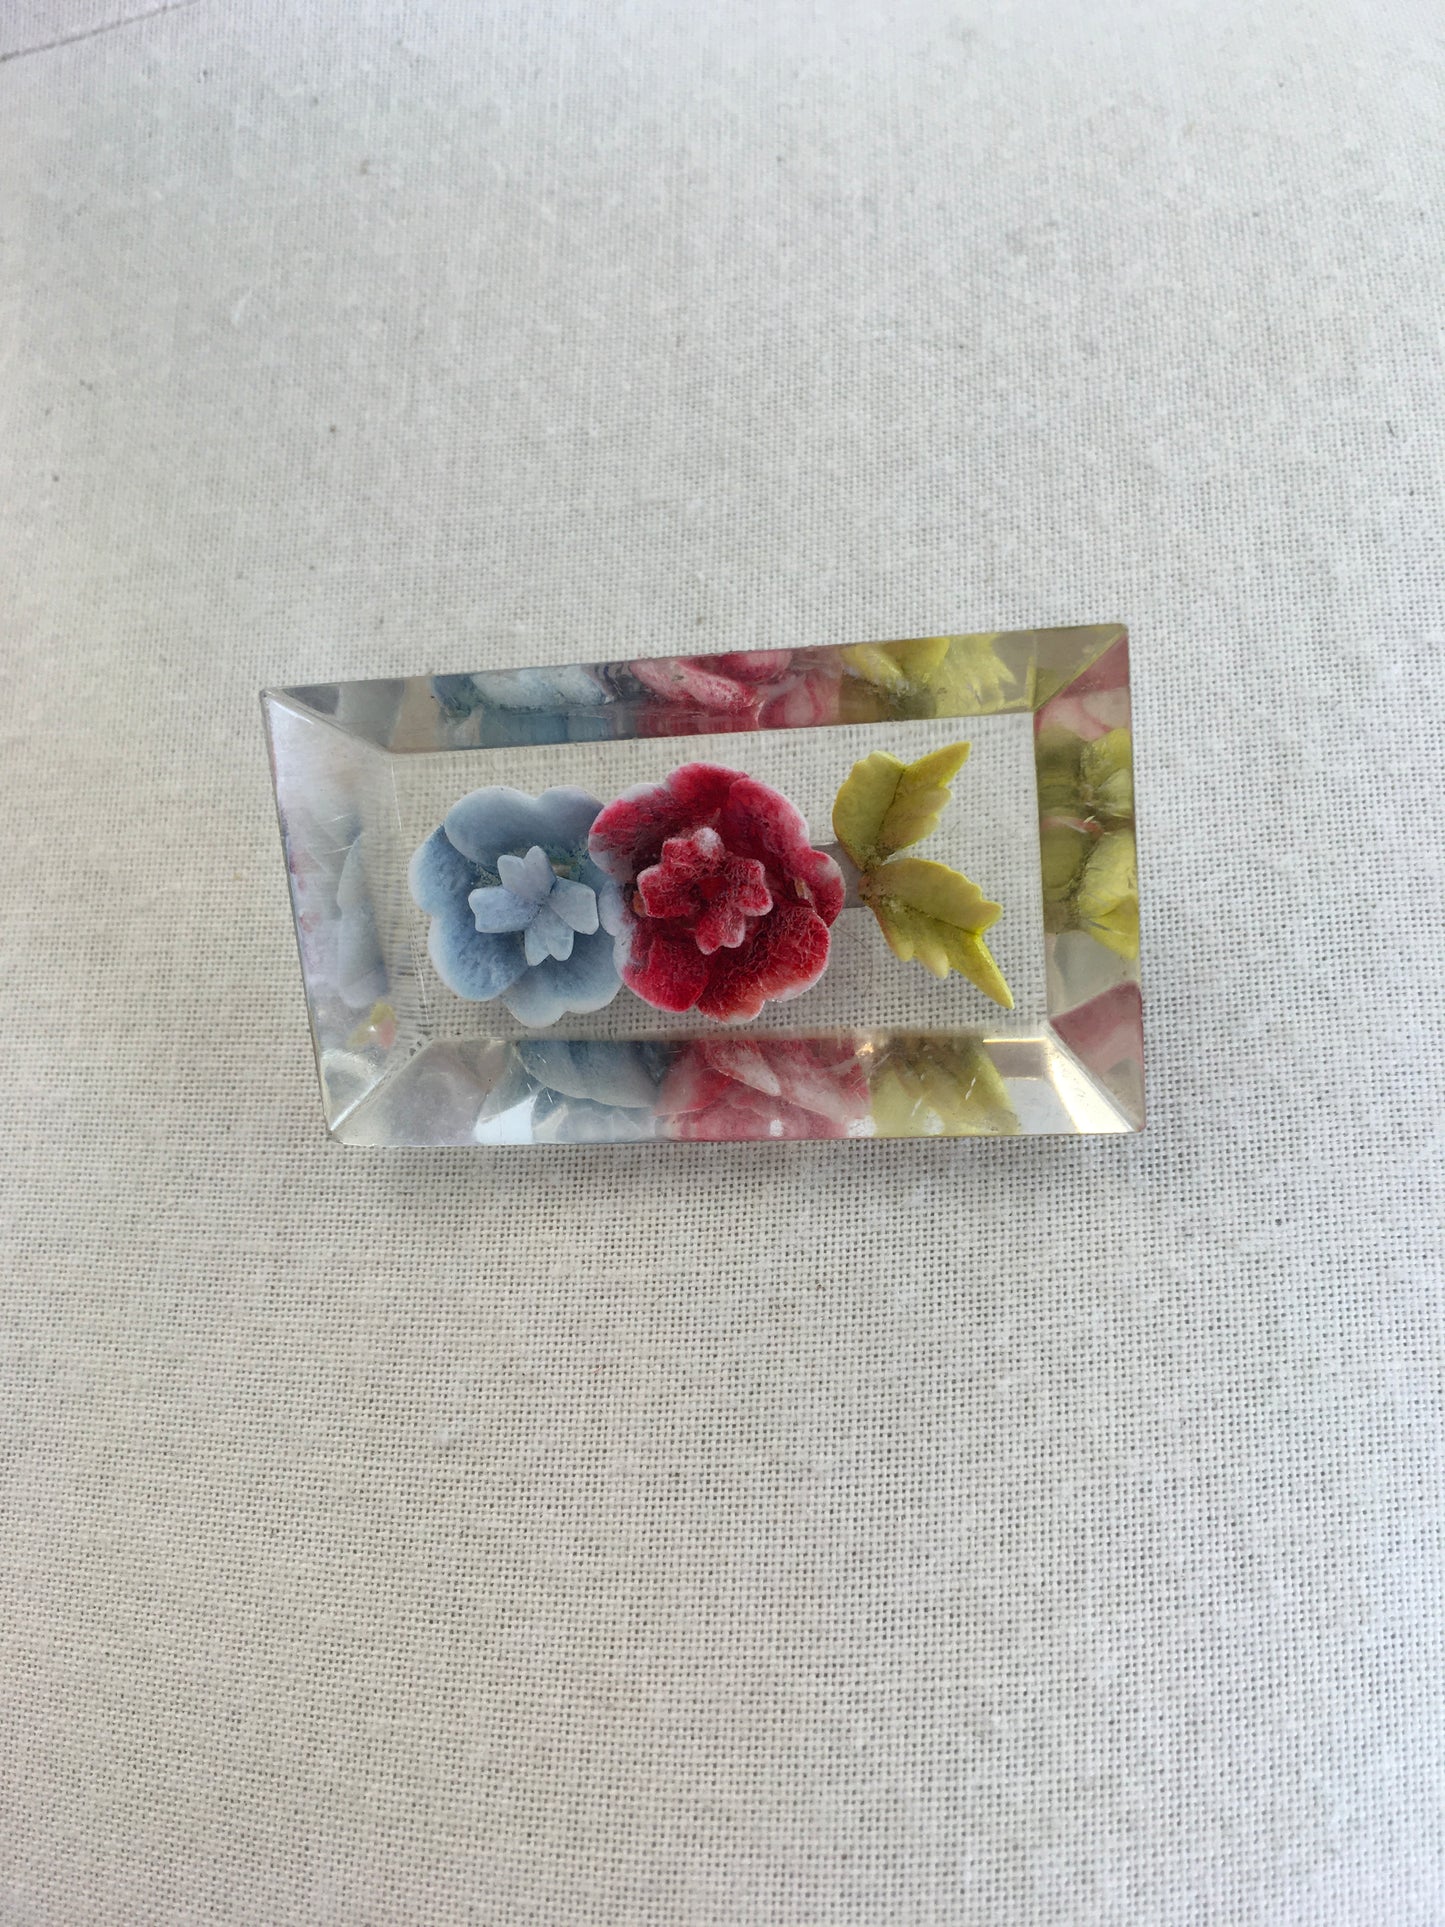 Original 1940’s Floral Reverse Carved Lucite Brooch - In A Red And Pale Blue with Green Leaves